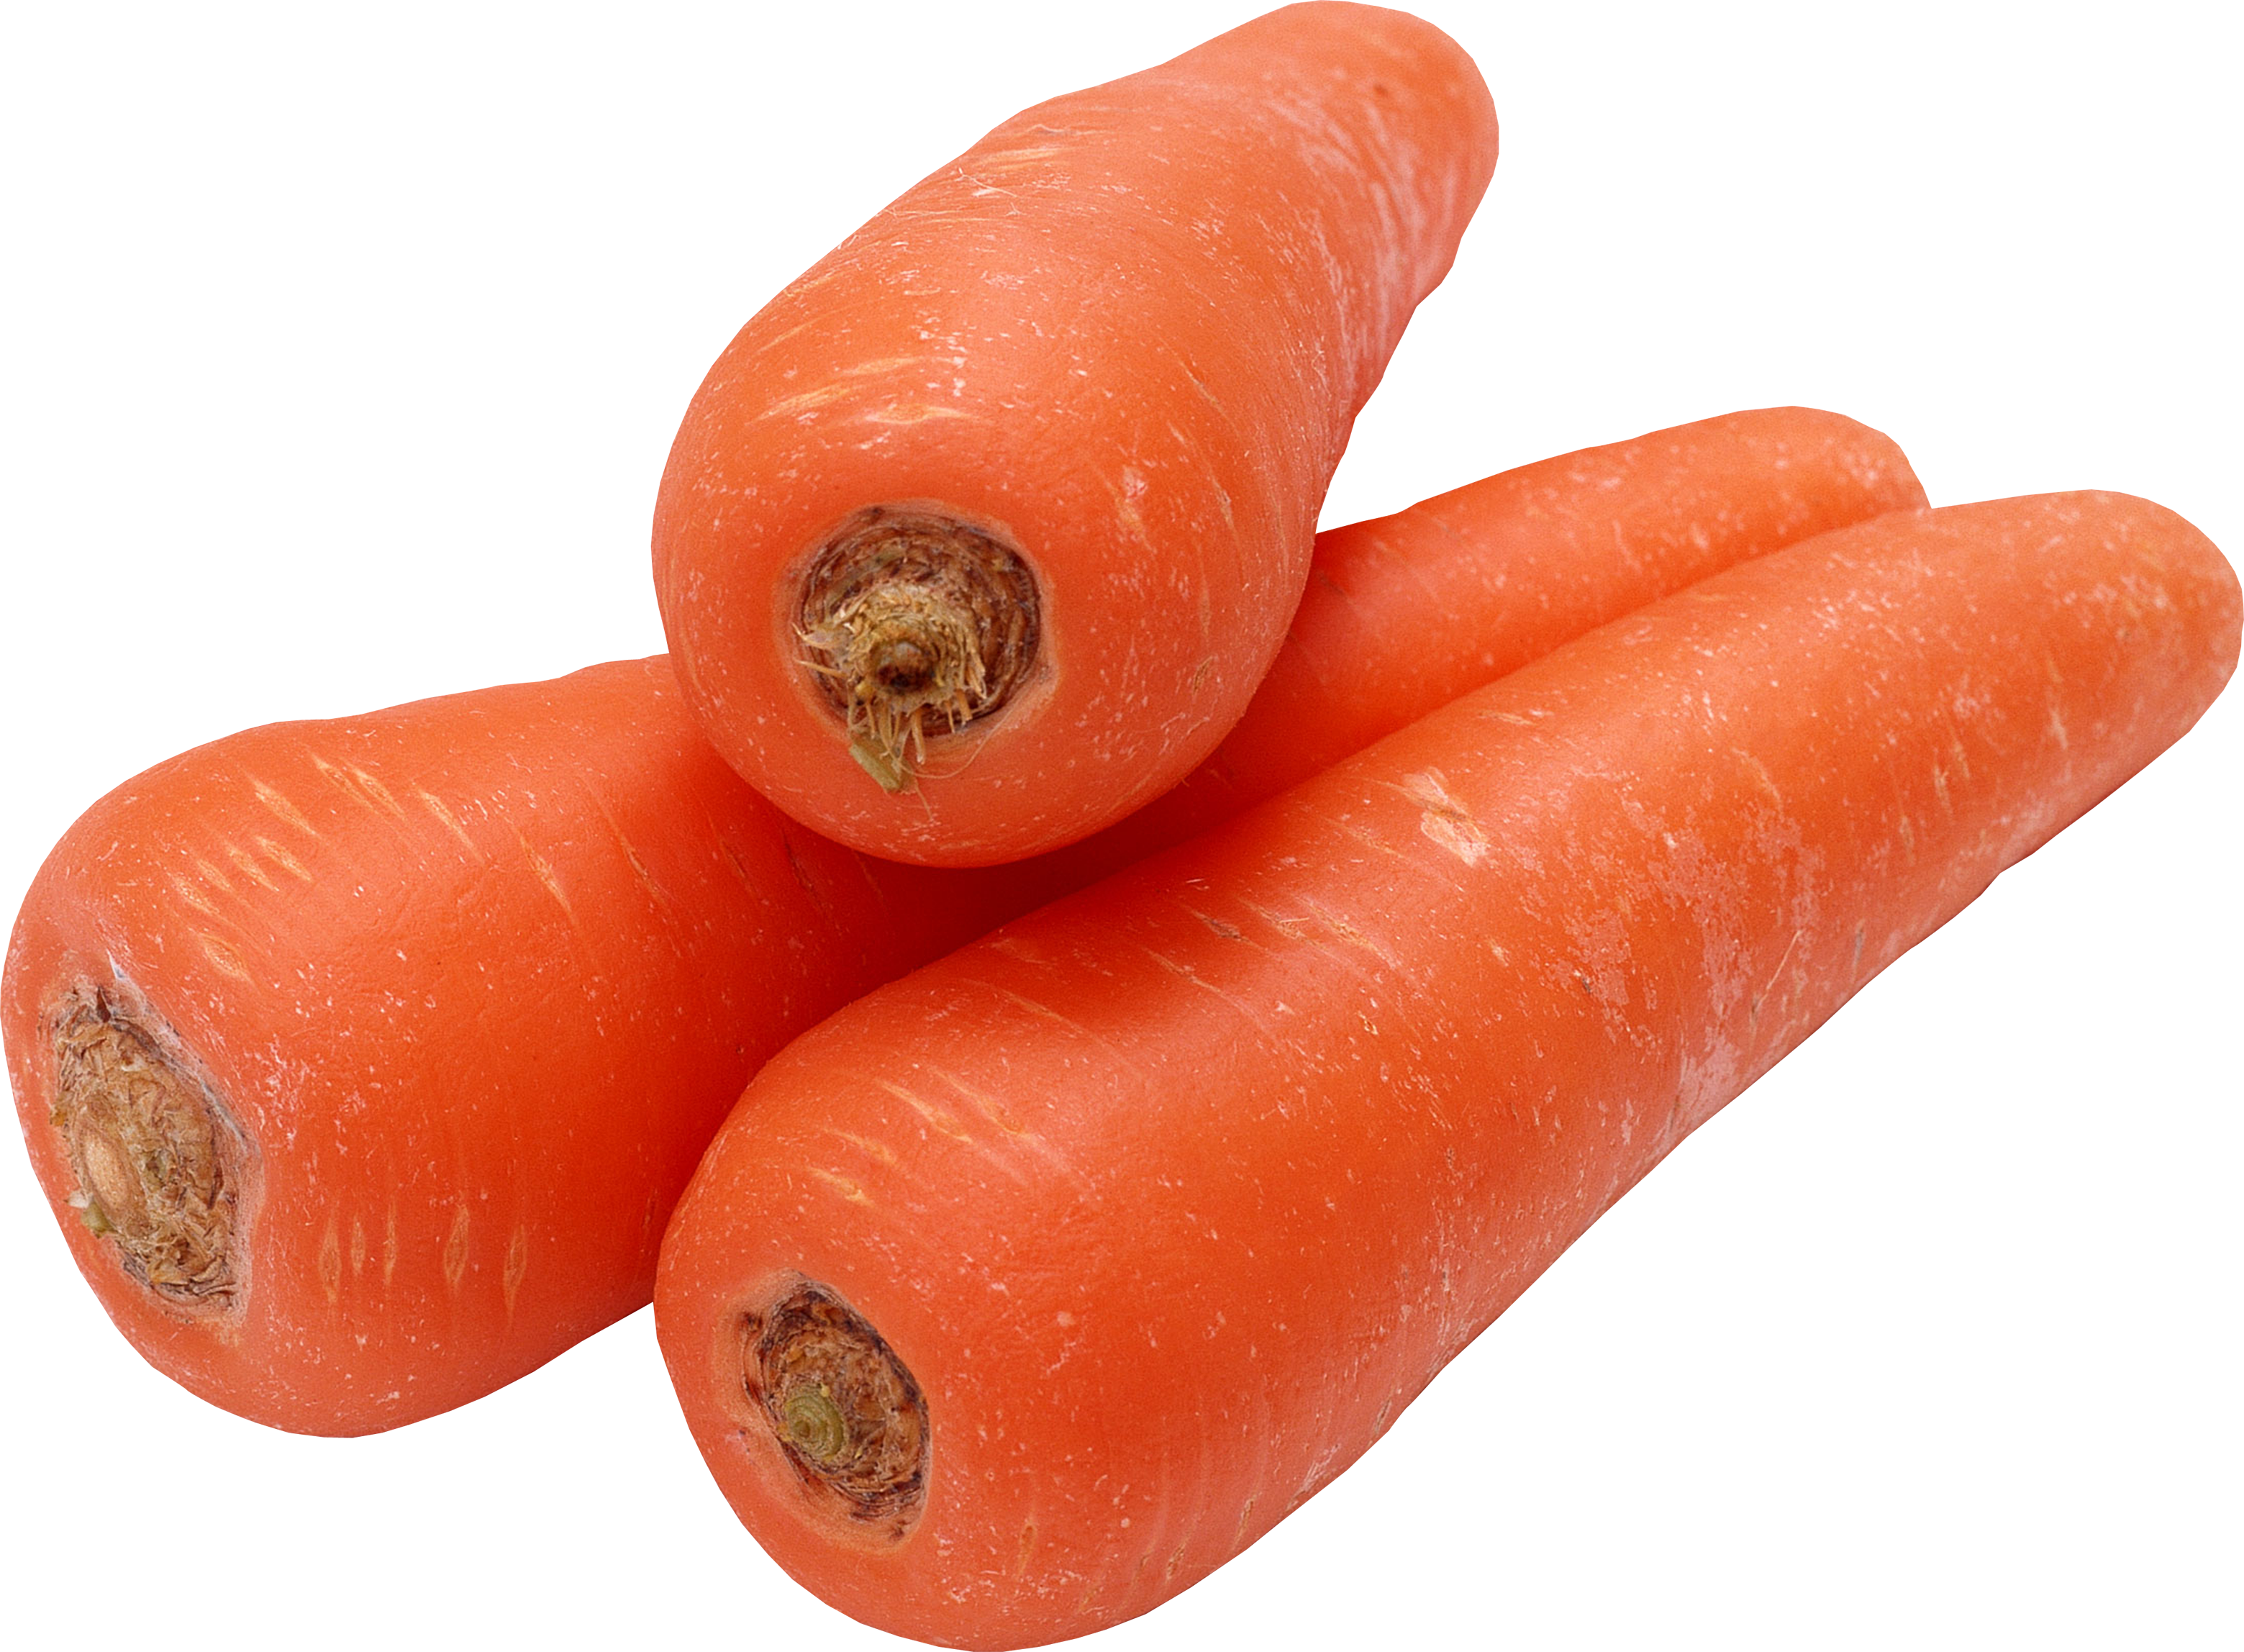 Carrot HD PNG Transparent Carrot HD.PNG Images. | PlusPNG